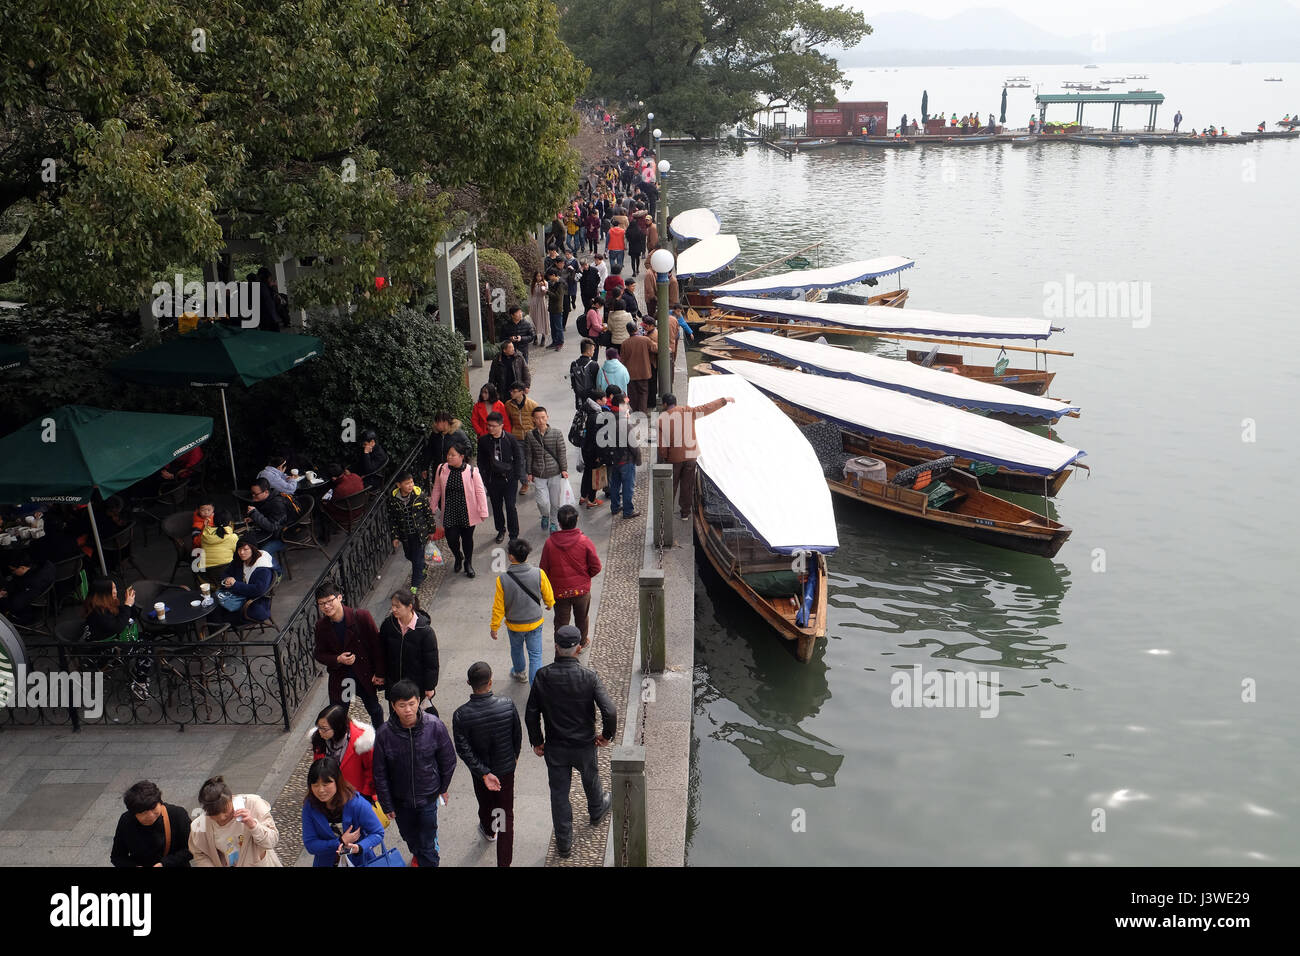 Crowd of tourists and boatmen on West Lake coast, famous park in Hangzhou city, China, February 21, 2016. Stock Photo